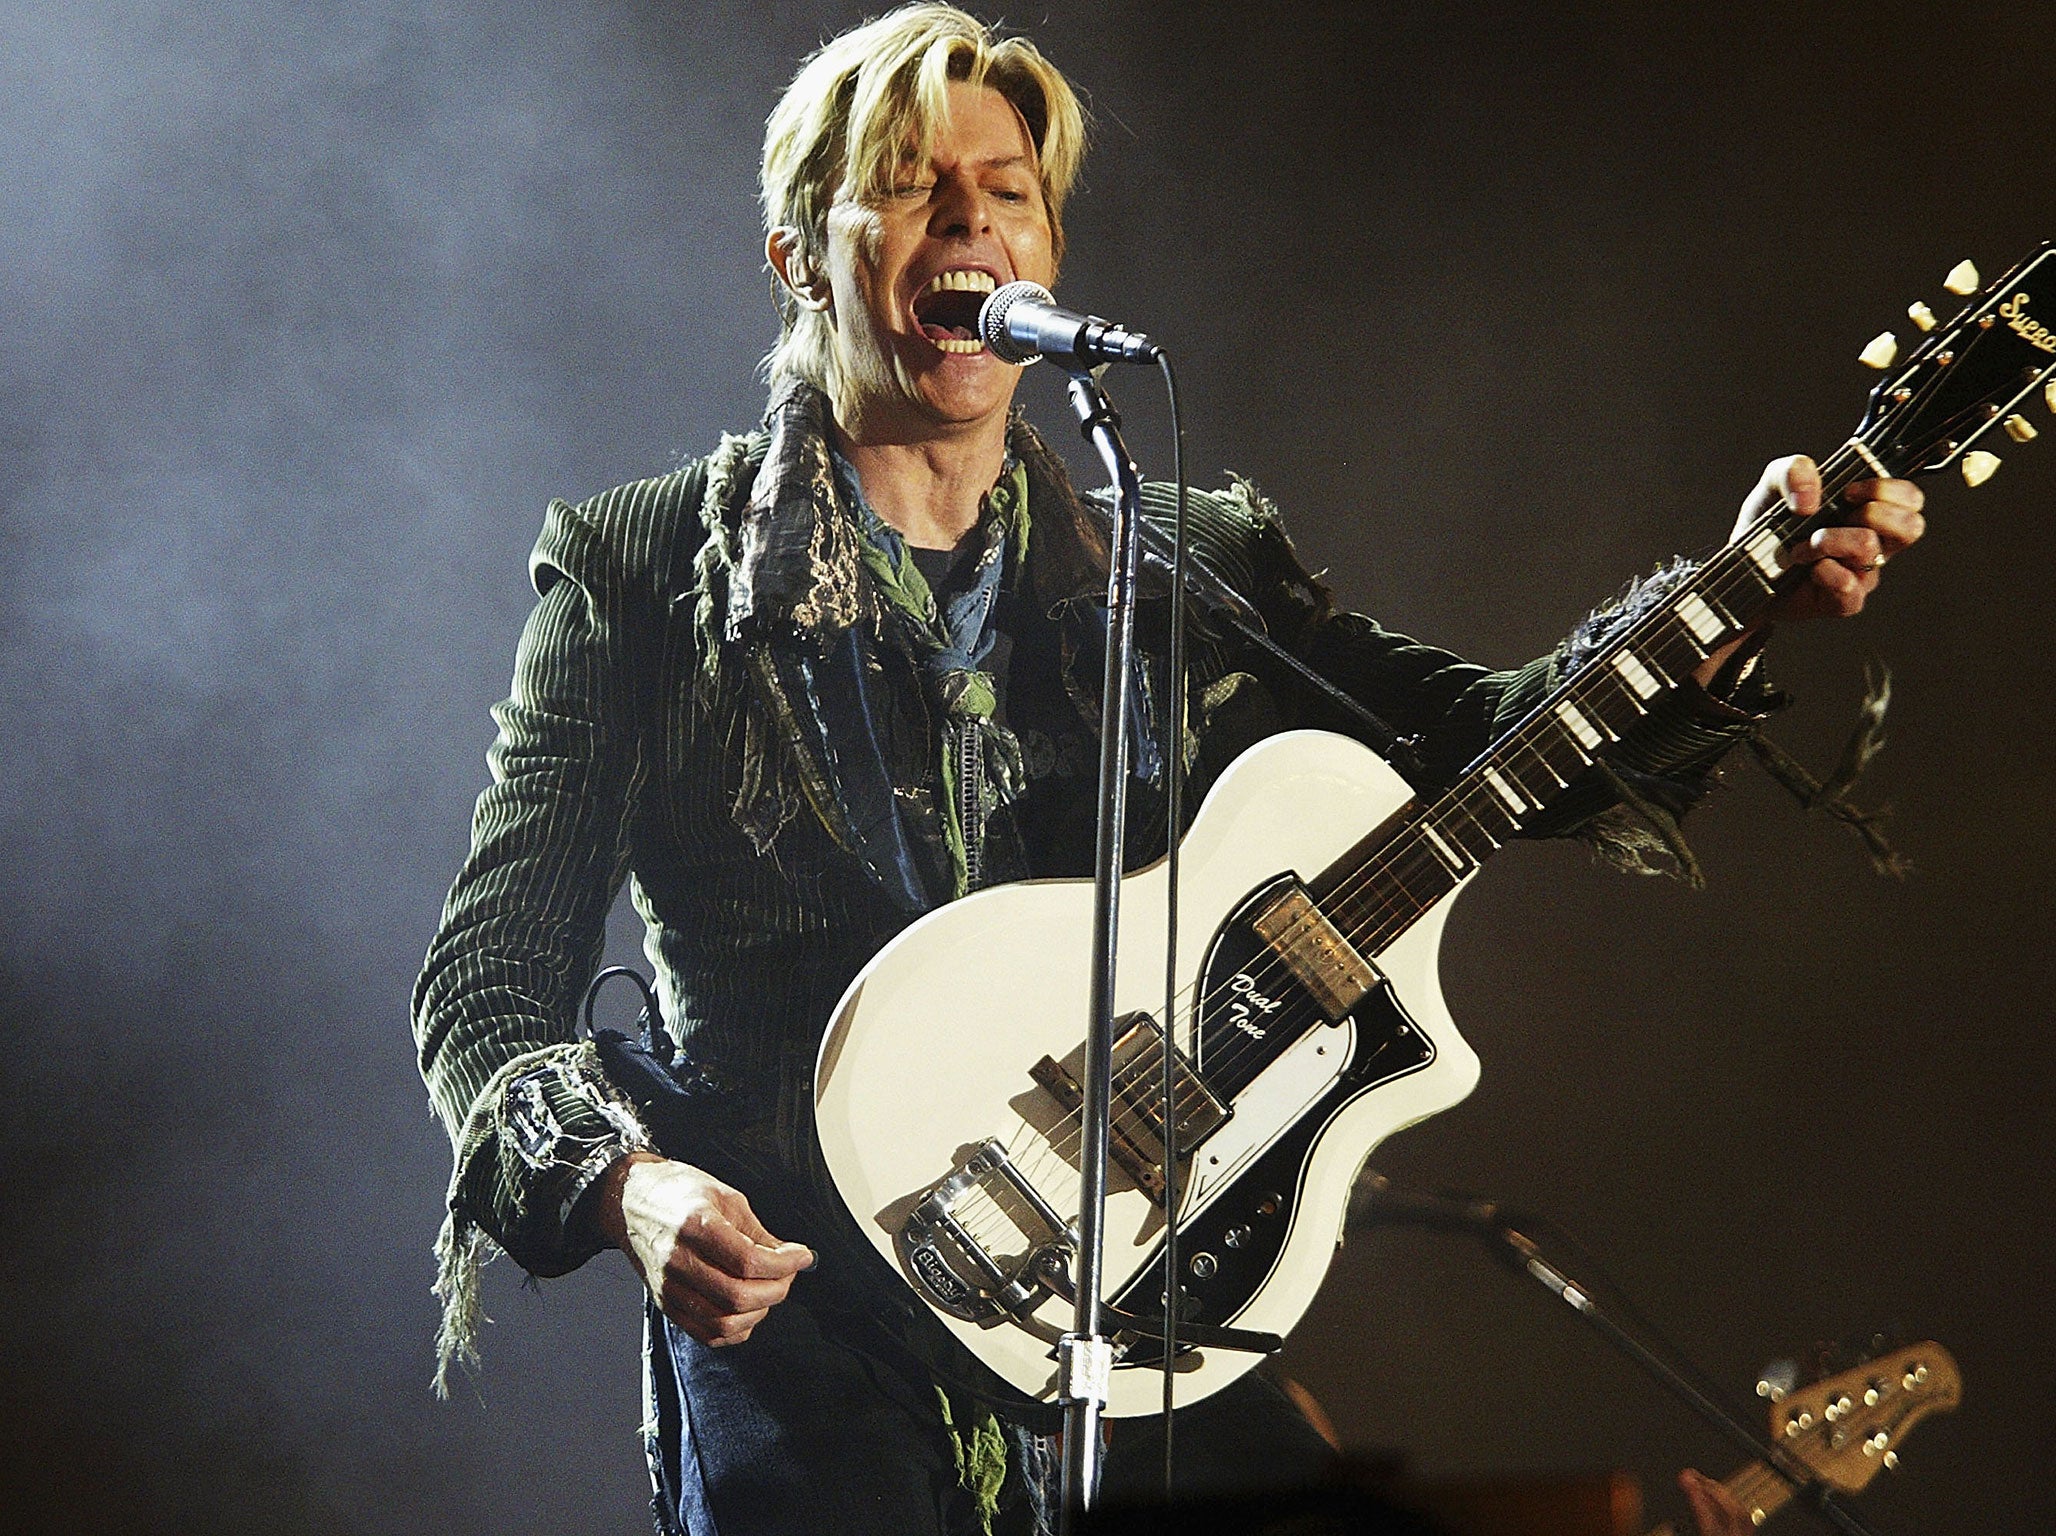 David Bowie performs on stage on the third and final day of 'The Nokia Isle of Wight Festival 2004' at Seaclose Park, on June 13, 2004 in Newport, UK